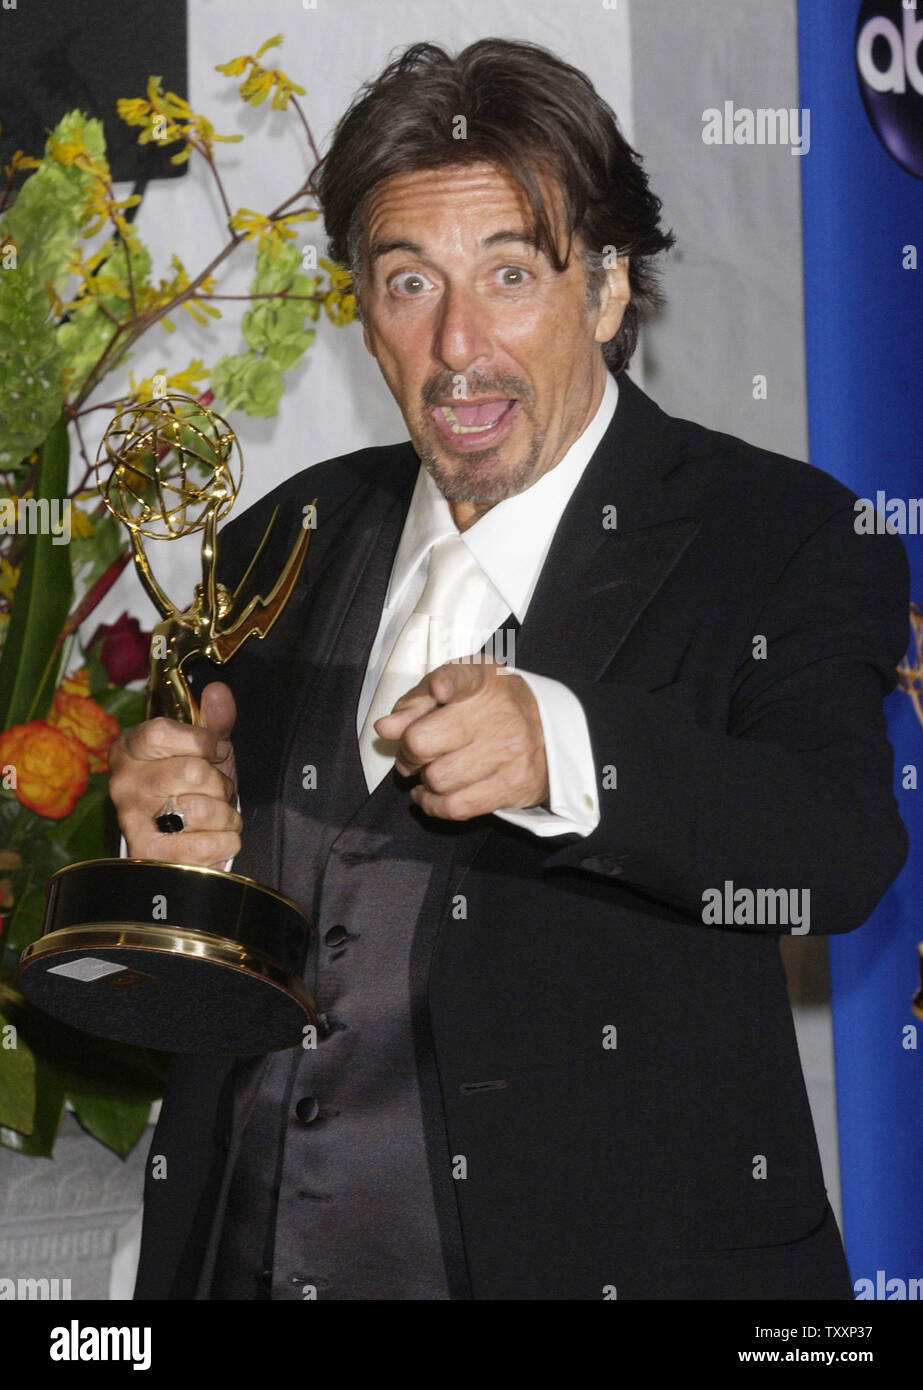 Al Pacino poses with his trophy for lead actor in a miniseries or a movie for his role in 'Angels in America,' during the 56th Annual Primetime Emmy Awards, Sunday, September 19, 2004 at the Shrine Auditorium in Los Angeles, California. 'Angels in America,' the adaptation of Tony Kushner's Pulitzer Prize-winning play about Americans facing AIDS in the 1980's, was honored as outstanding miniseries and won acting trophies for Al Pacino, Meryl Streep, Mary-Louise Parker and Jeffrey Wright. Kusher received a best writing award and Mike Nichols won for best director.   (UPI Photo/Jim Ruymen) Stock Photo